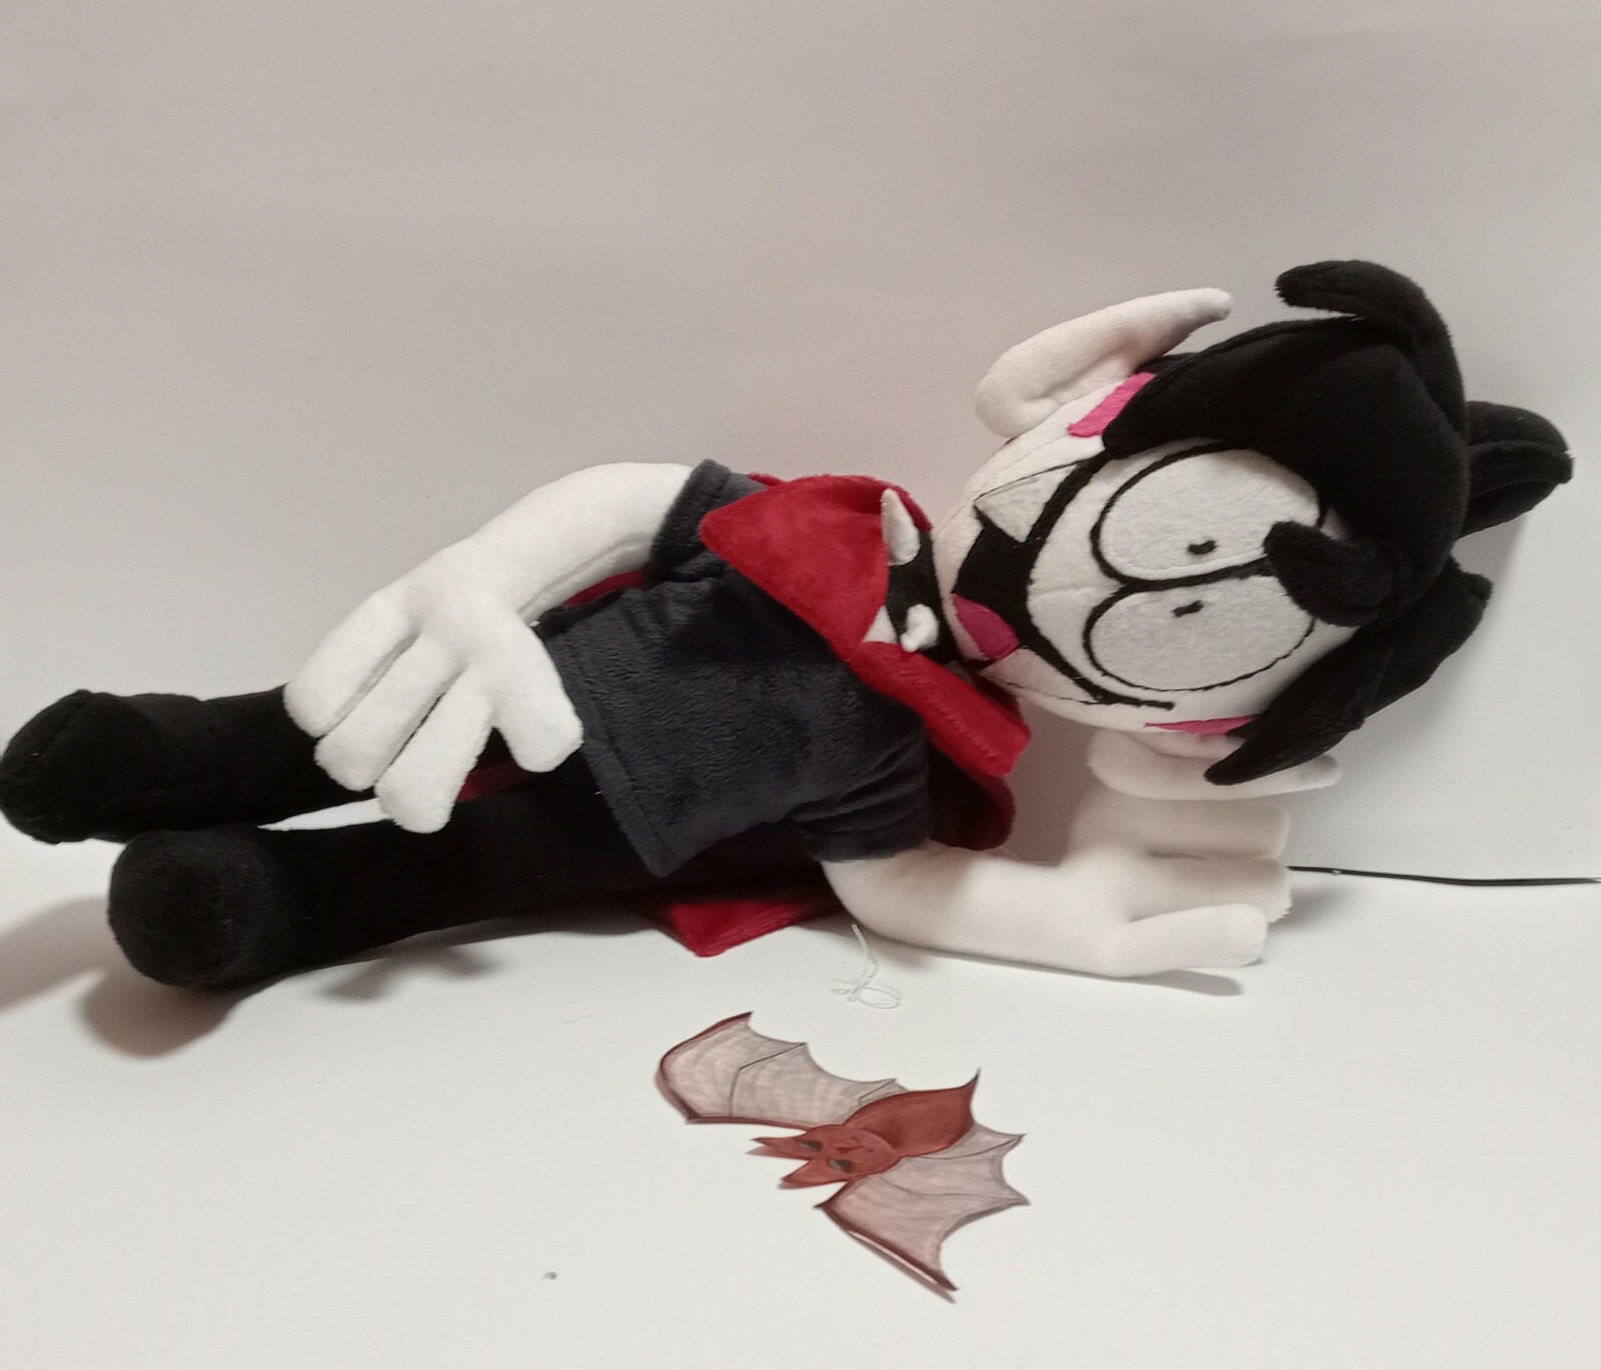 Ethan (Sheeprampage) on X: A New Mini Teaser of Catnaps plush